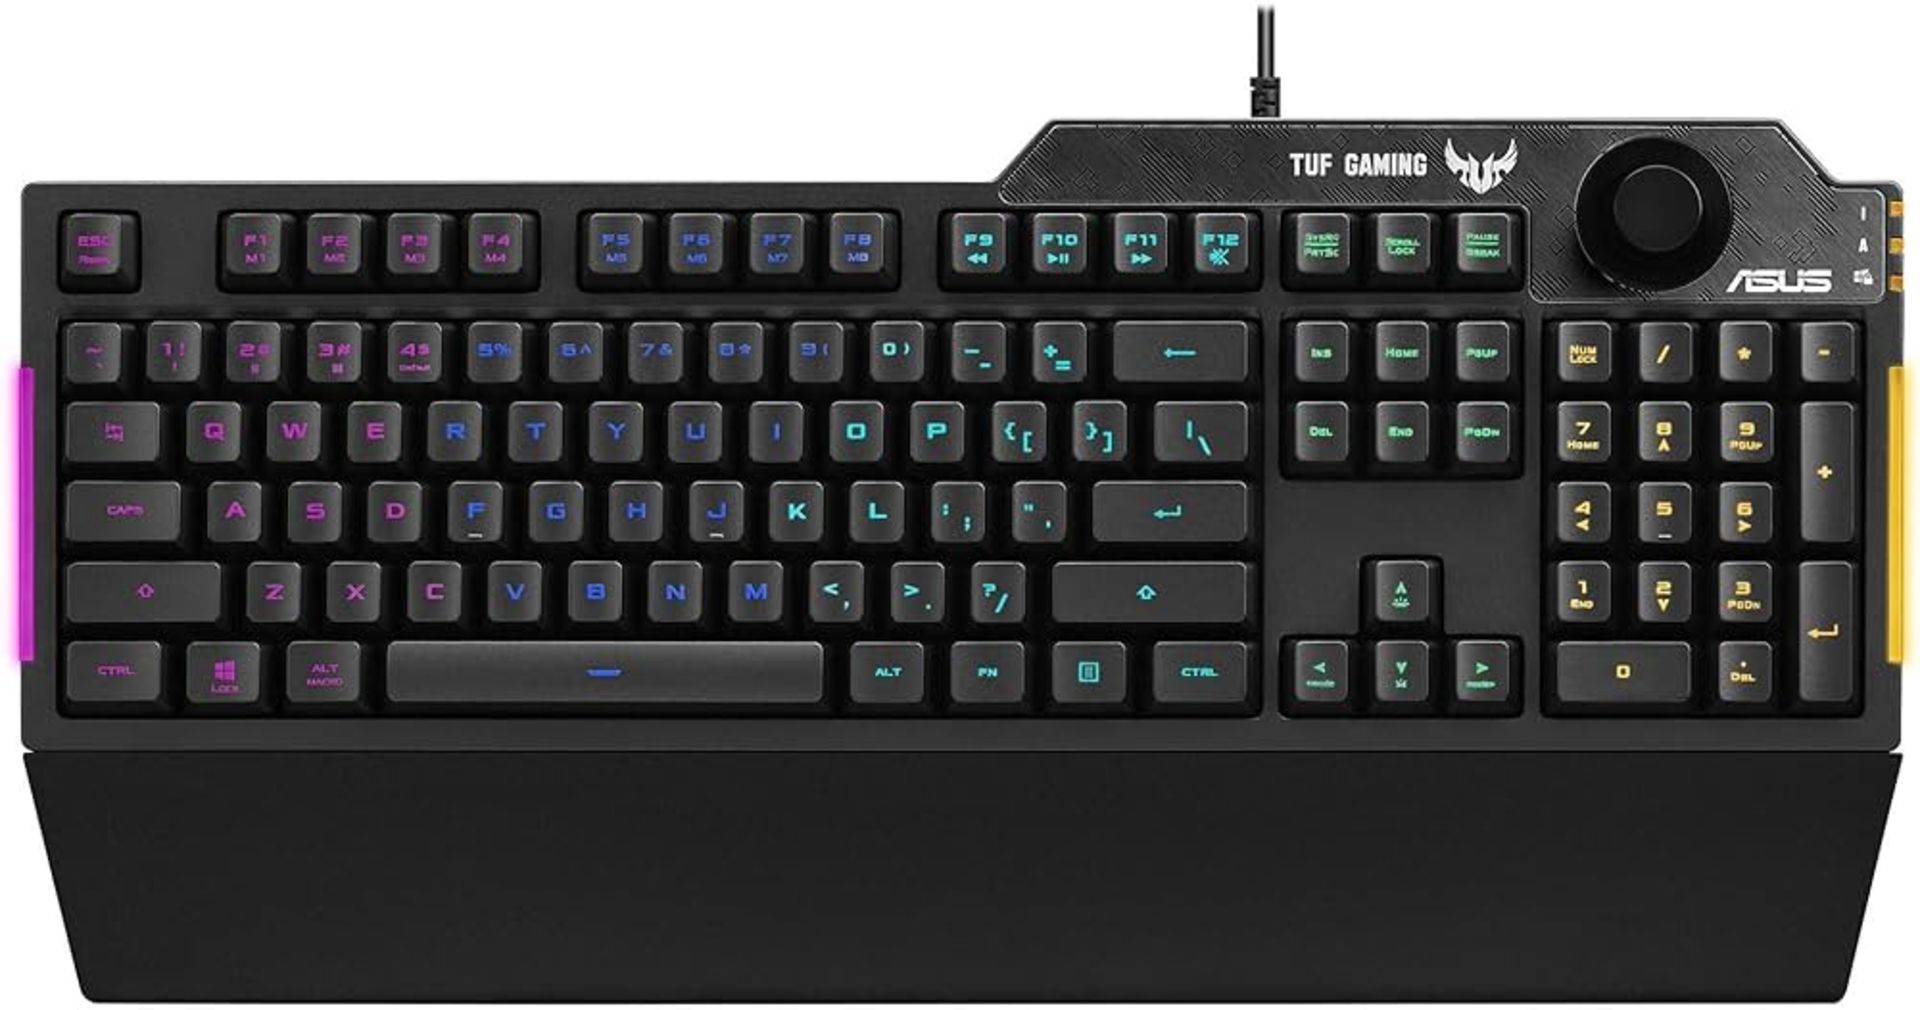 1 x Asus TUF K1 RGB Gaming Keyboard - Brand New and Boxed - Features Volume Control, Side Light - Image 2 of 8